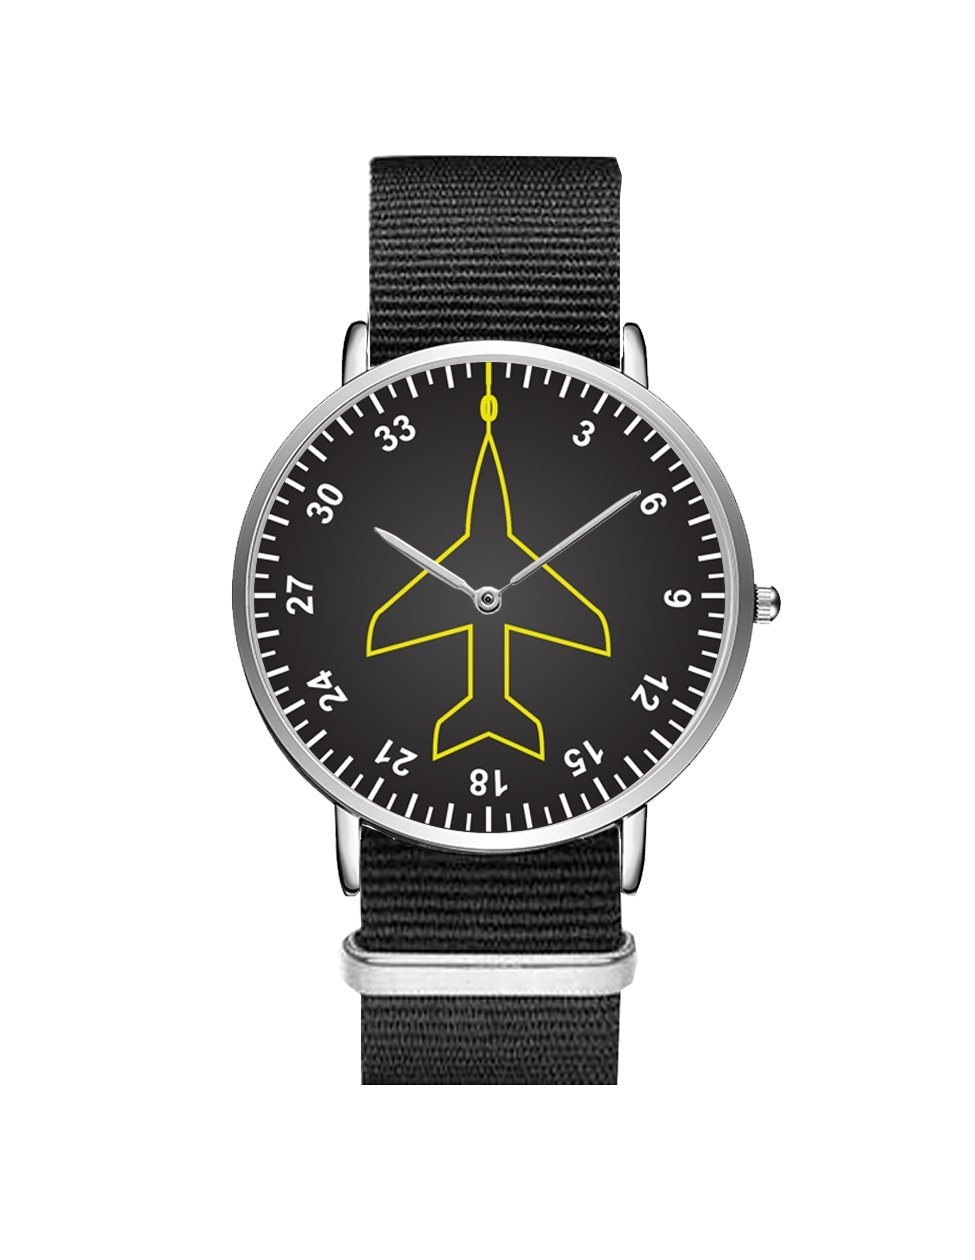 Airplane Instrument Series (Heading) Leather Strap Watches Pilot Eyes Store Silver & Black Nylon Strap 